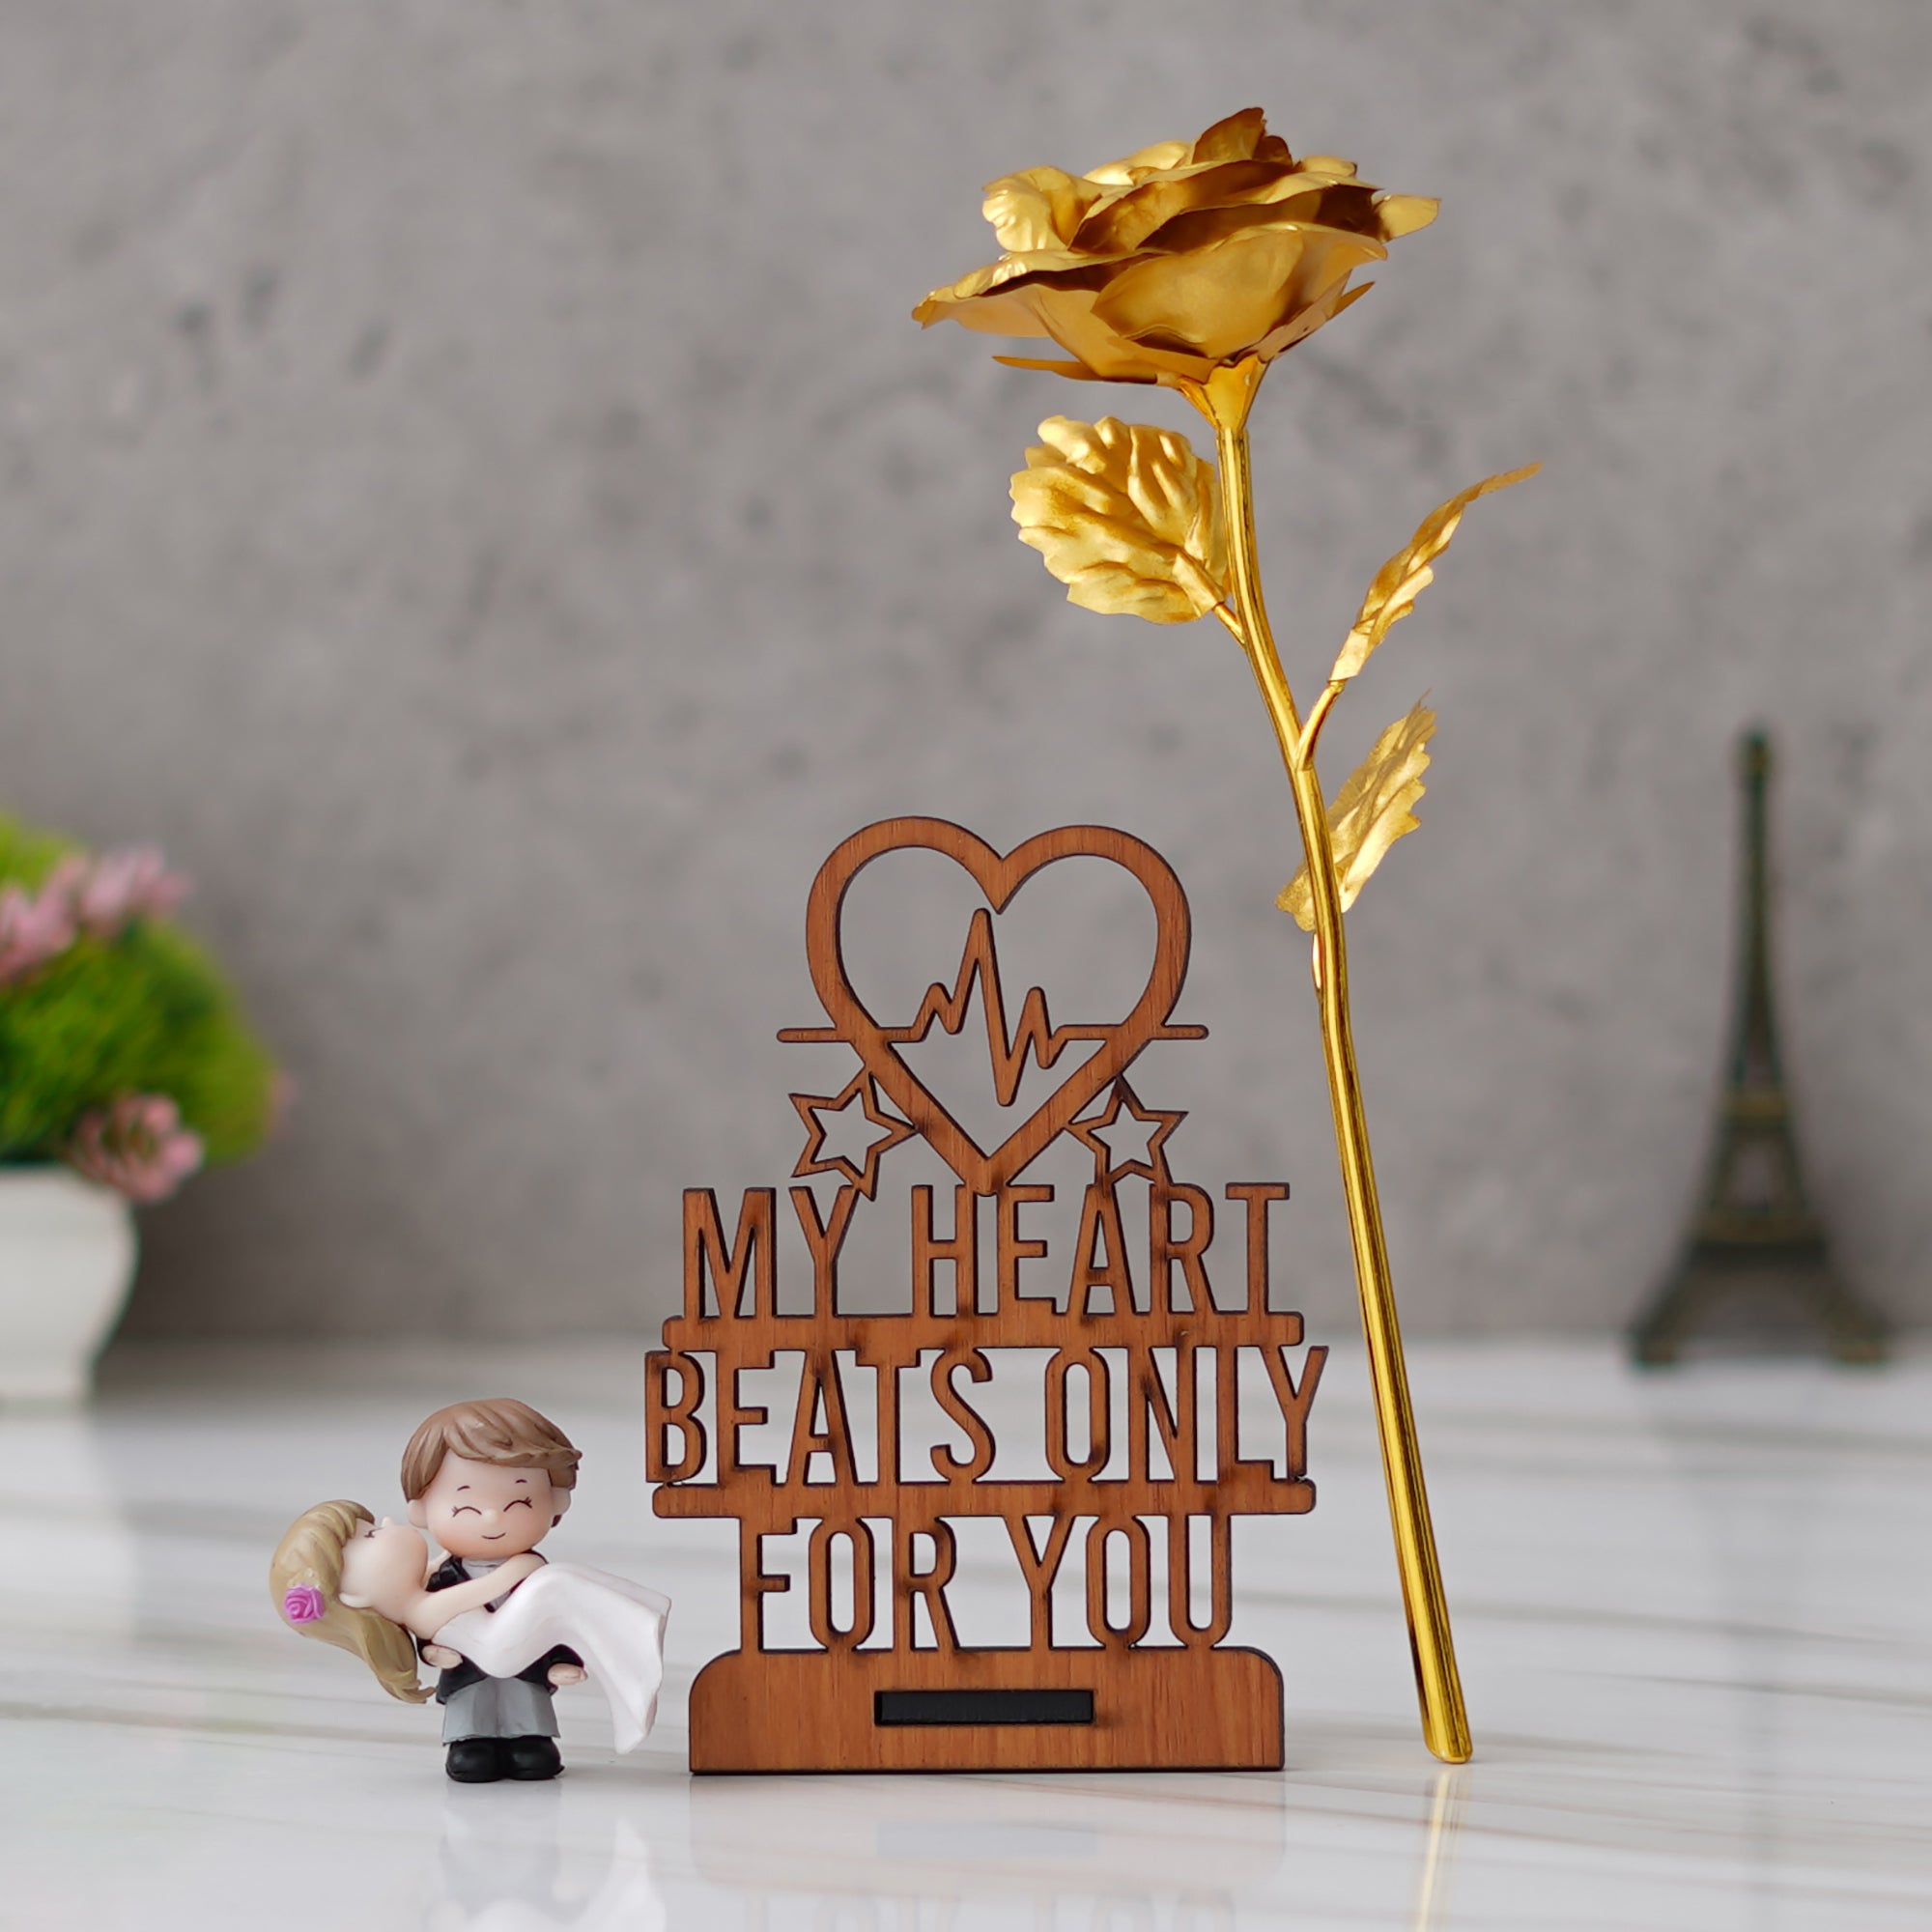 Valentine Combo of Golden Rose Gift Set, "Love You" Wooden Showpiece With Stand, Bride Kissing Groom Romantic Polyresin Decorative Showpiece